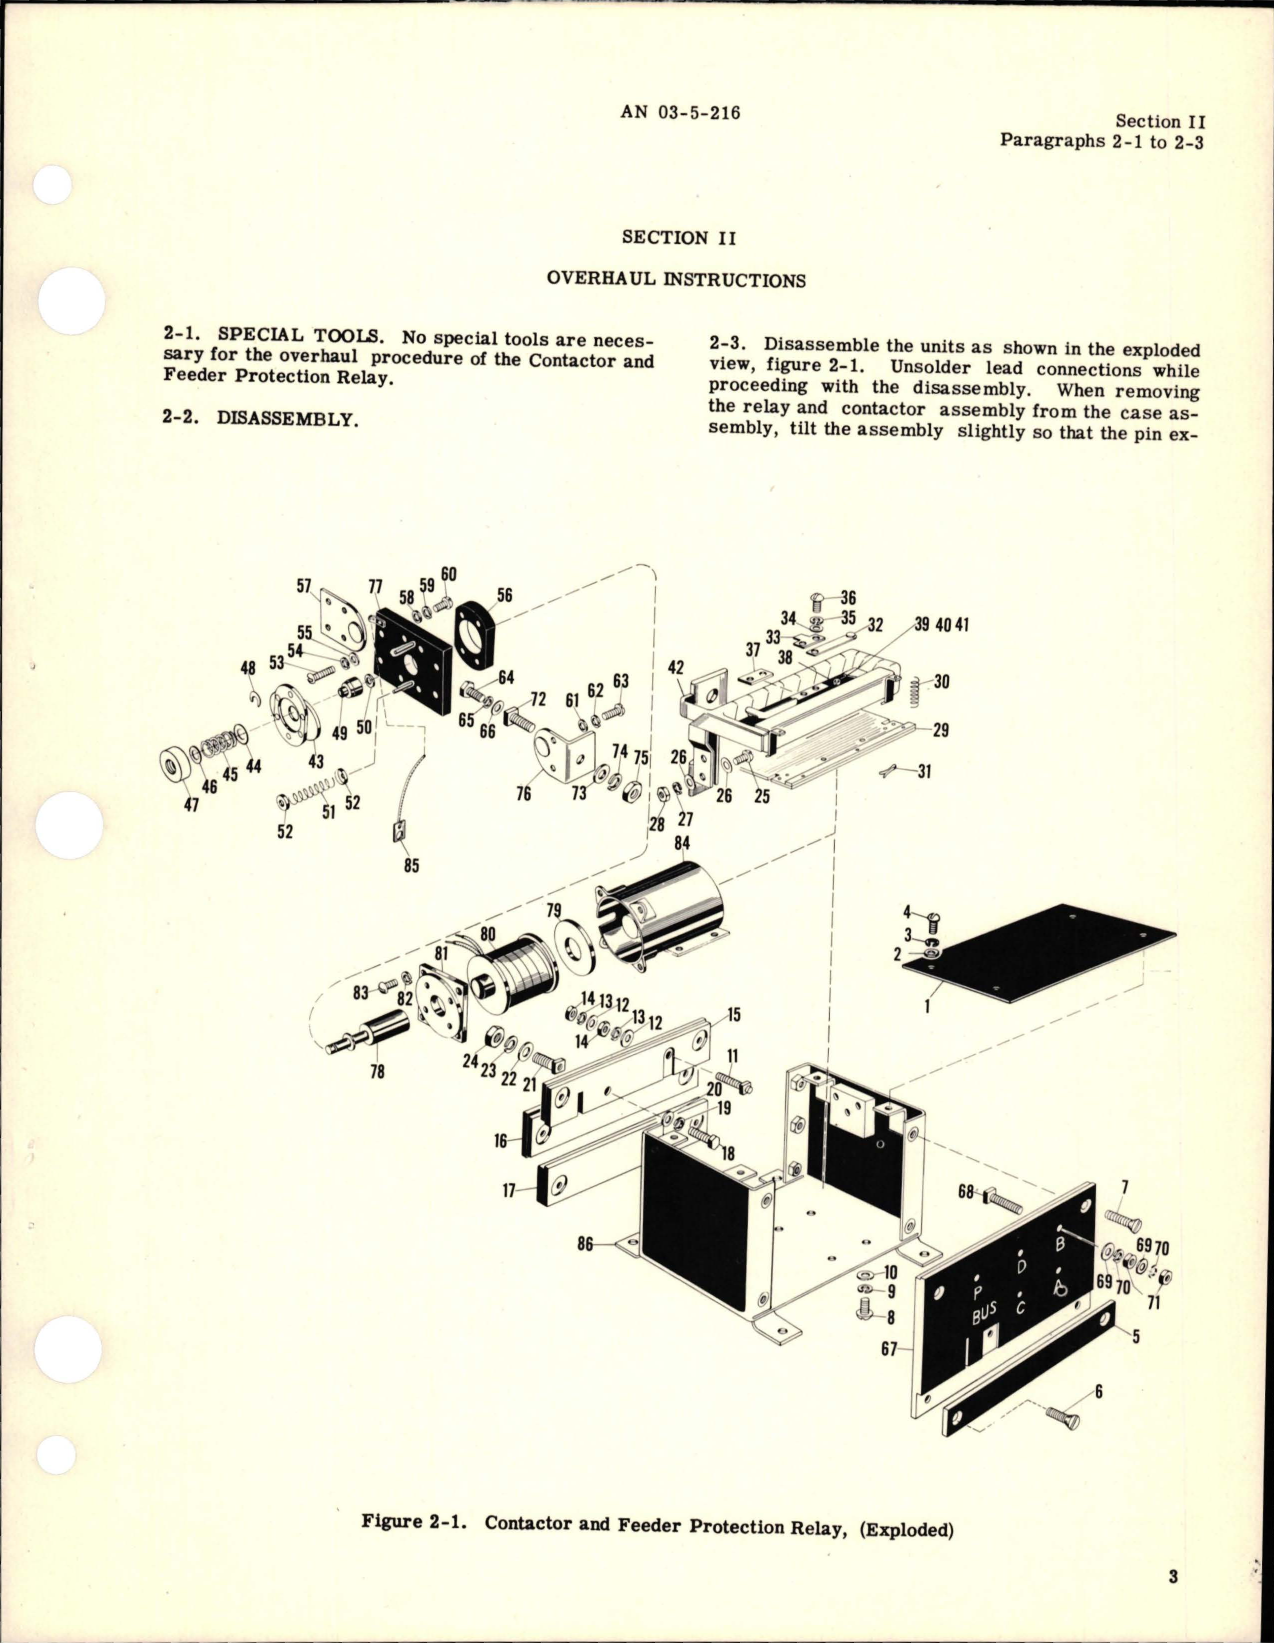 Sample page 5 from AirCorps Library document: Overhaul Instructions for Contactor and Feeder Protection Relay - Type AVR-182 - Part A24A9336